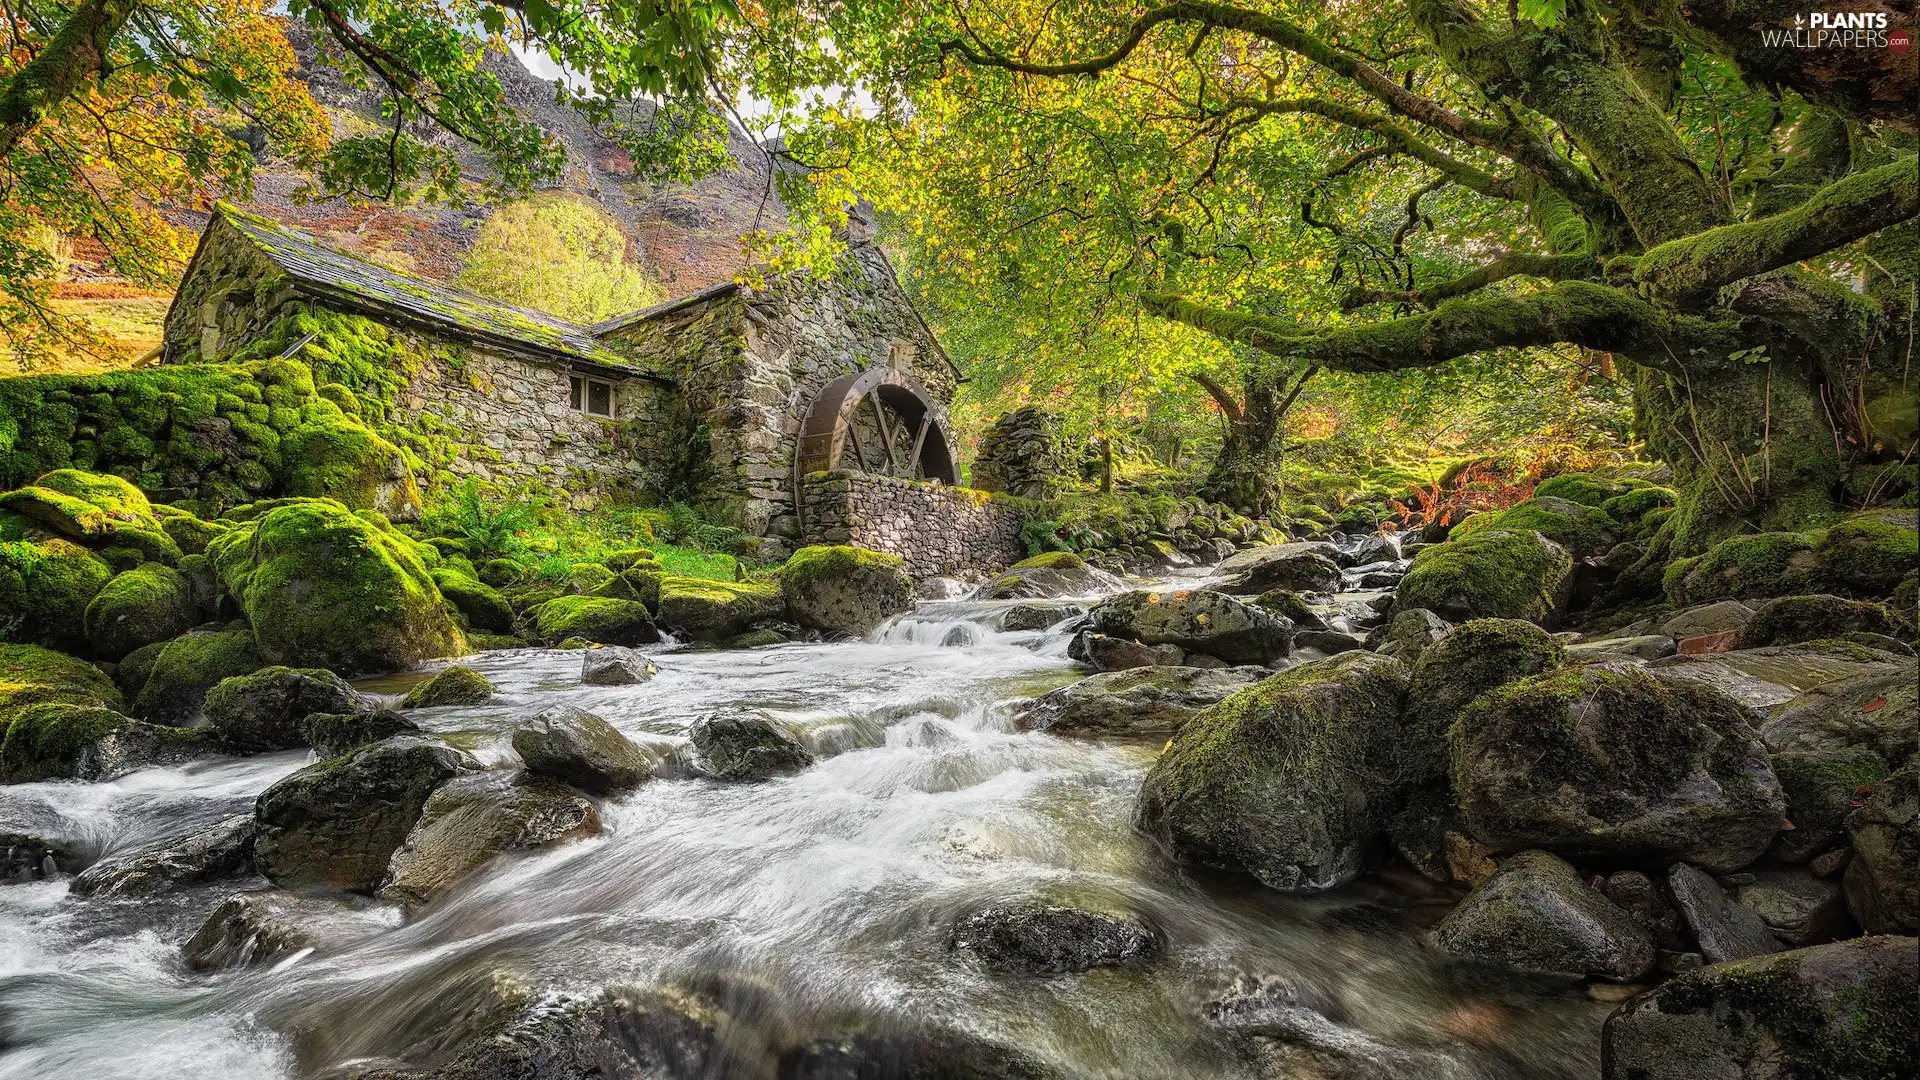 mossy, Cumbria County, stone, trees, Windmill, England, Borrowdale, viewes, Stones, River